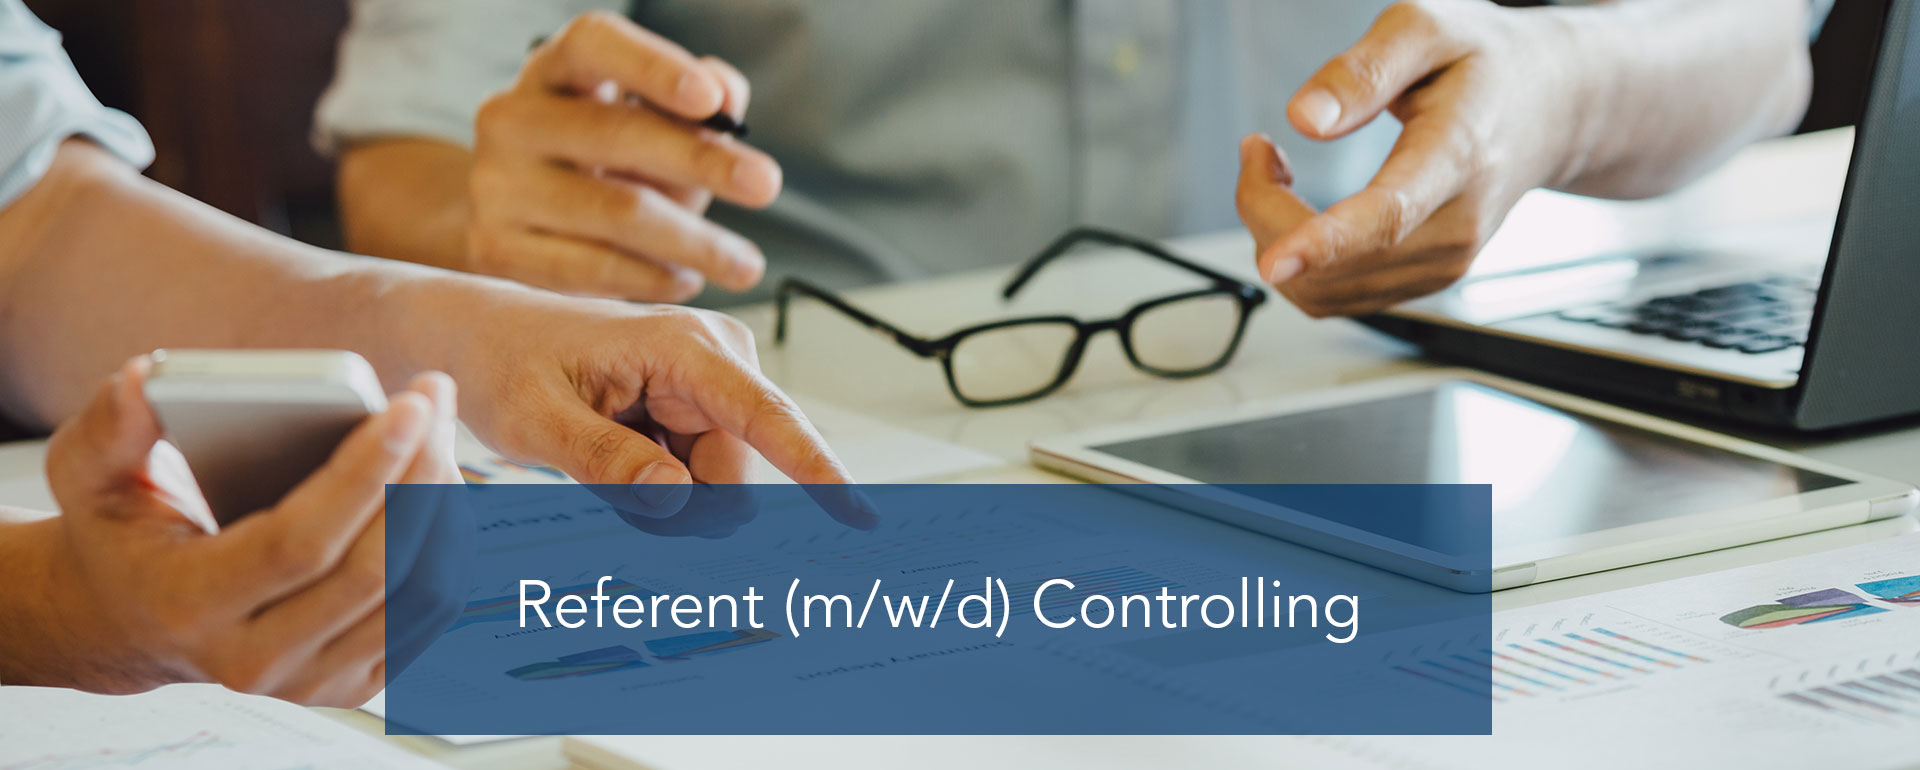 Referent (m/w/d) Controlling